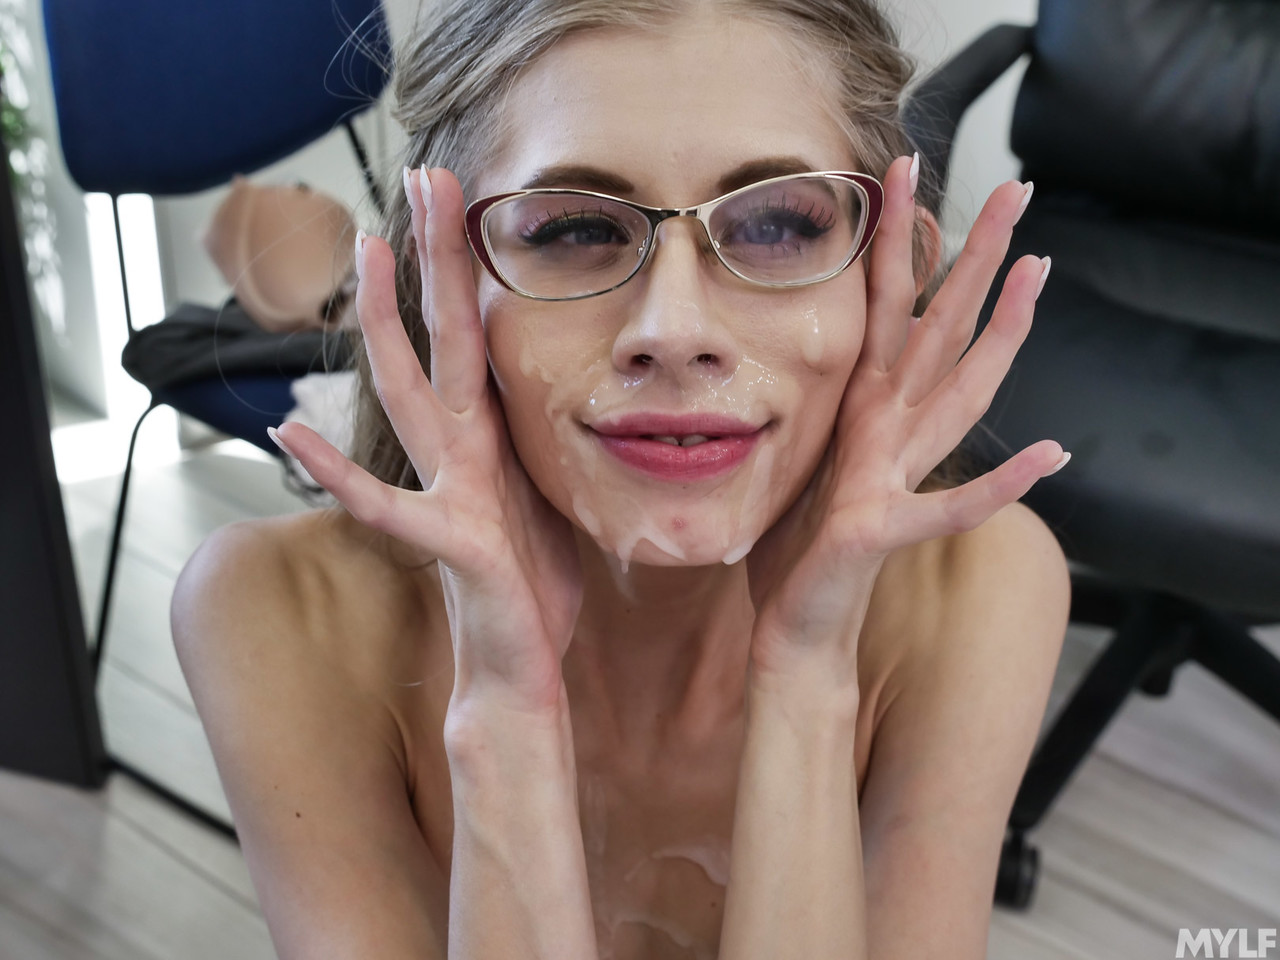 Secretary Kyaa Chimera shows her long legs and gets a facial after office sex foto porno #422605943 | MYLF Pics, Kyaa Chimera, Mike Mancini, Facial, porno ponsel